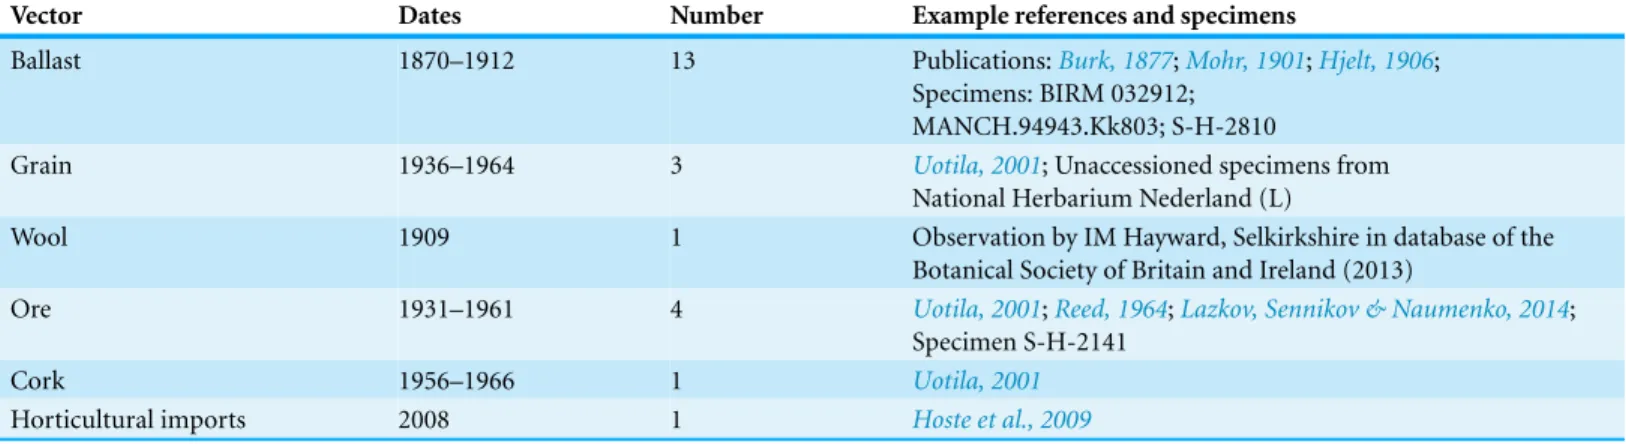 Table 1 Introduction vectors gleaned from historical sources. The vectors stated or implied from specimens and publications, including the range of dates that vectors were mentioned either on specimens or in publications.